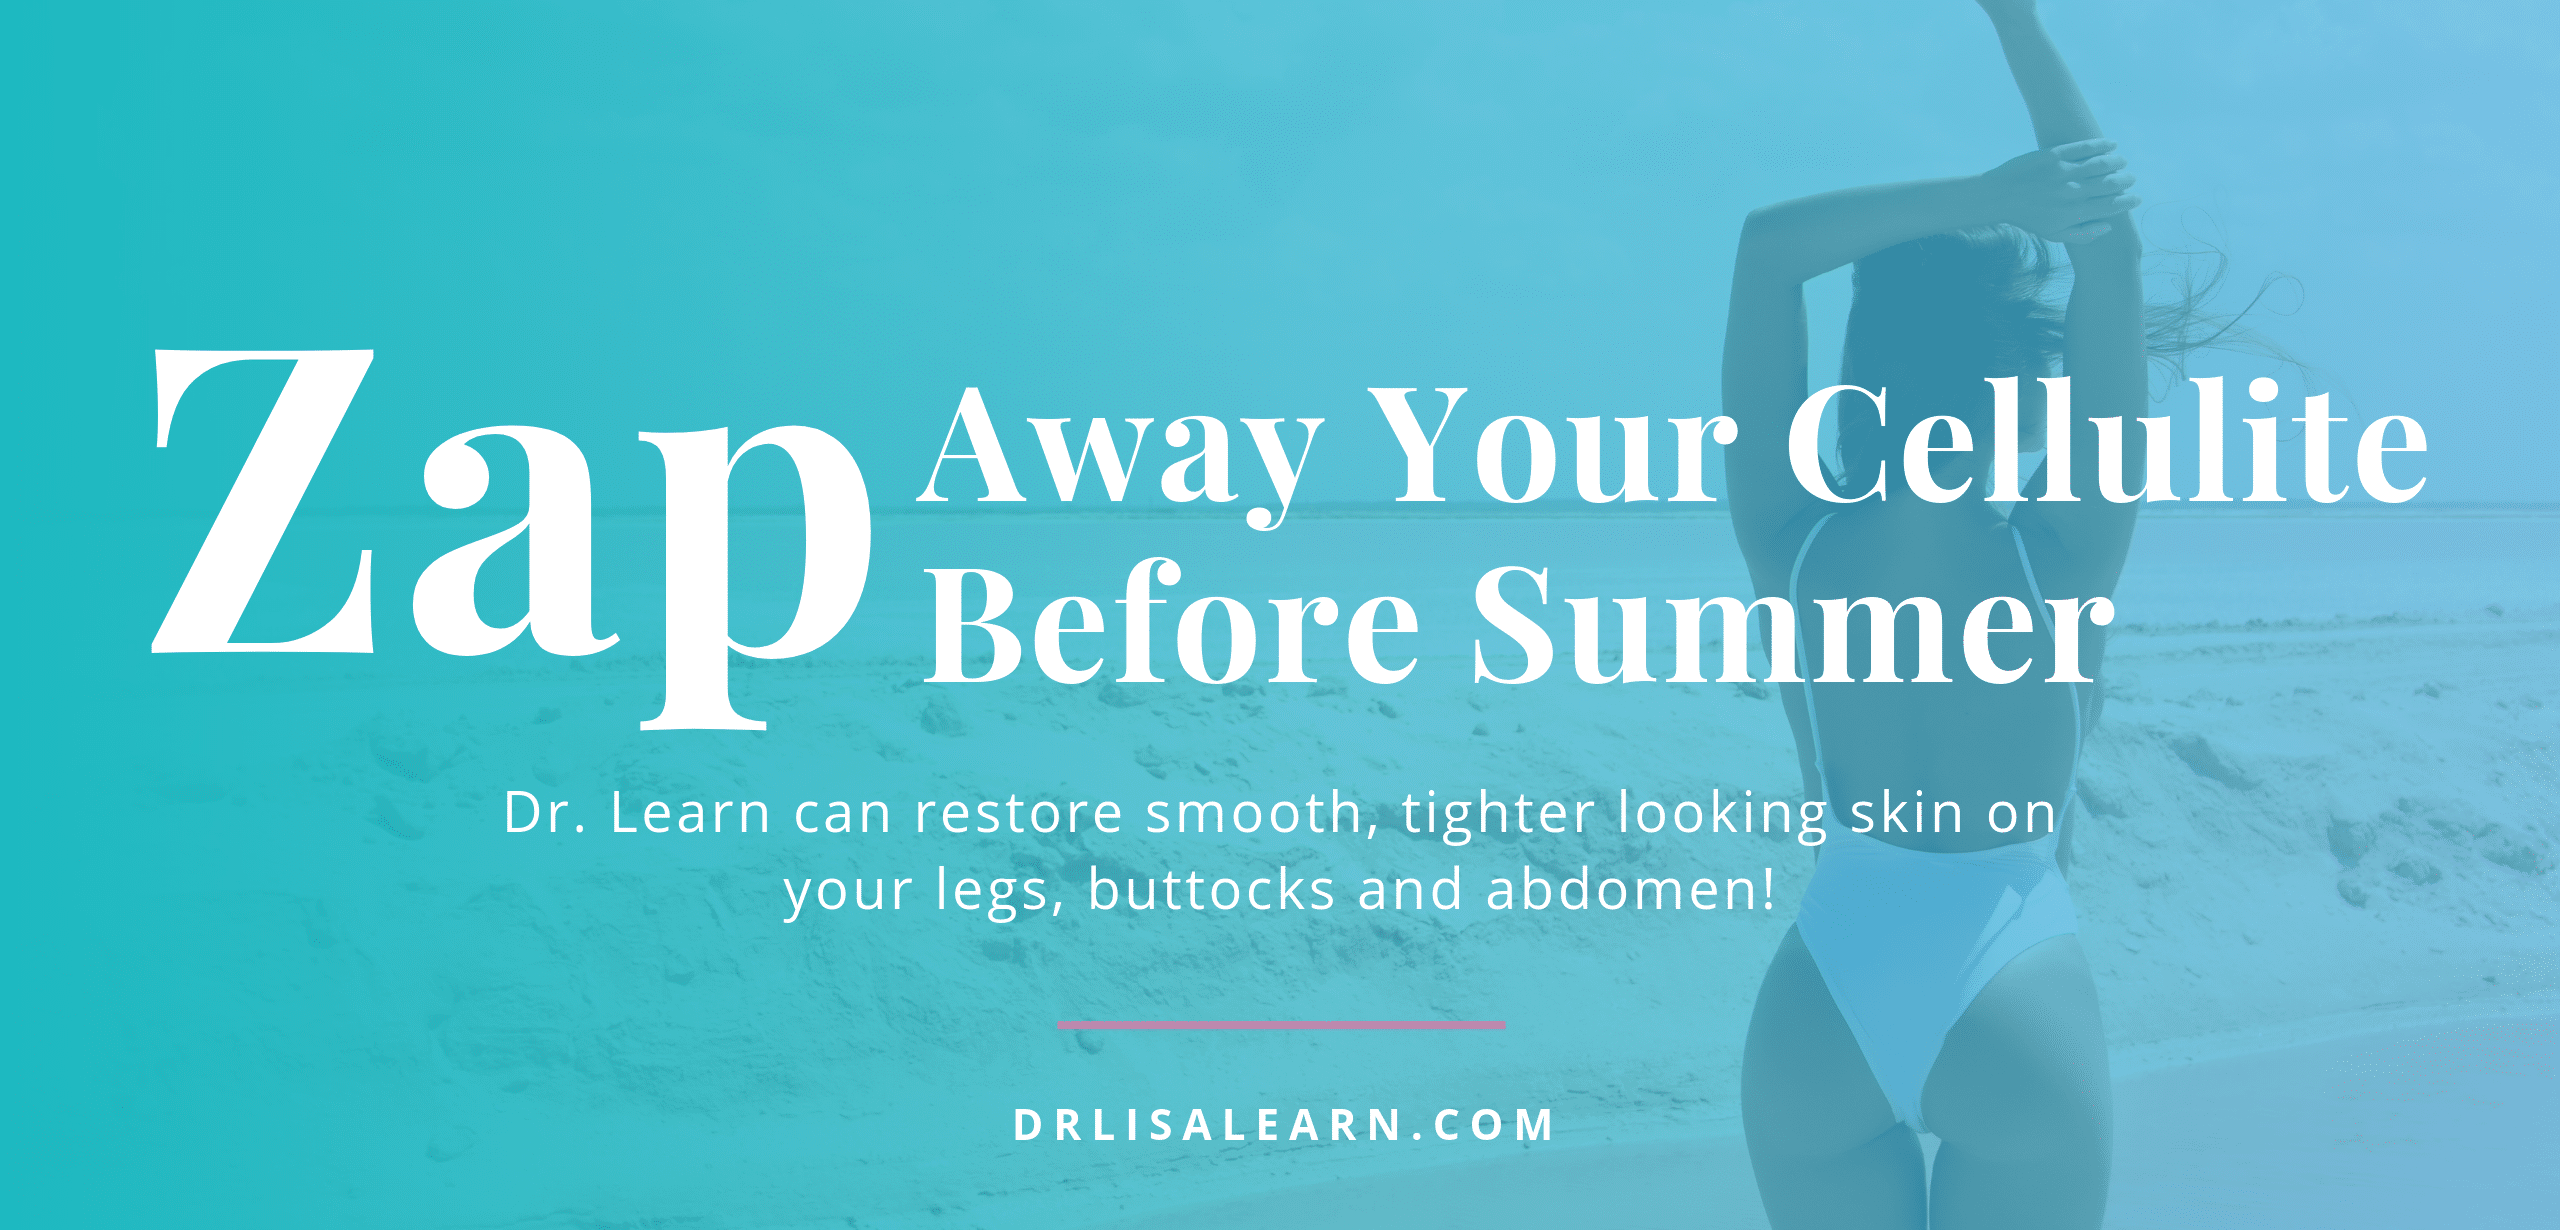 Zap away your cellulite before summer